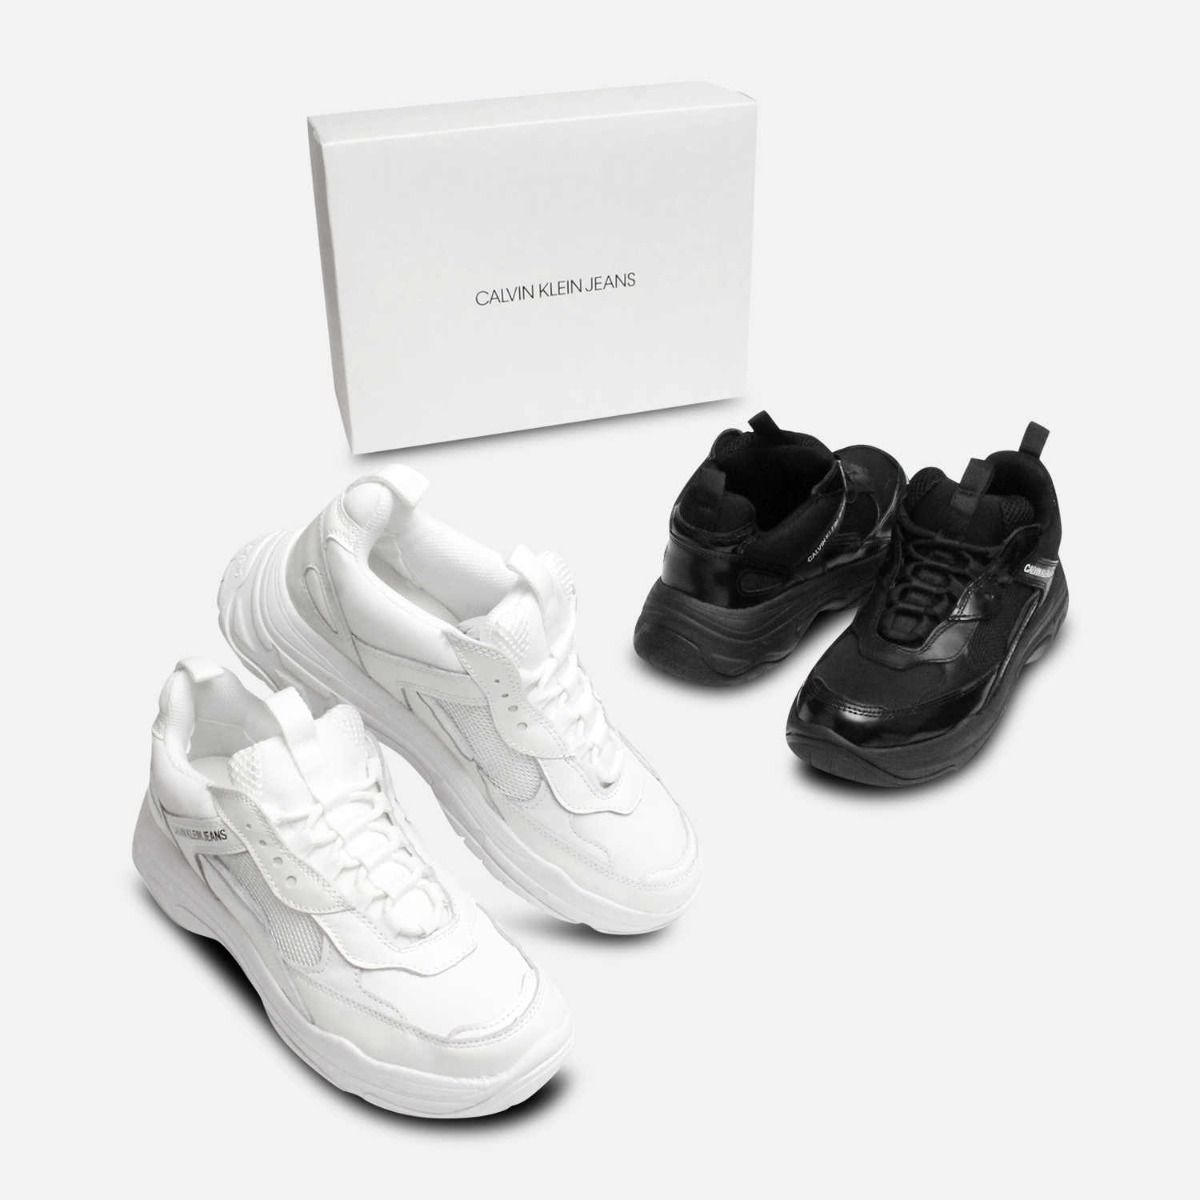 Maya Chunky Trainers in White Leather by Calvin Klein Jeans